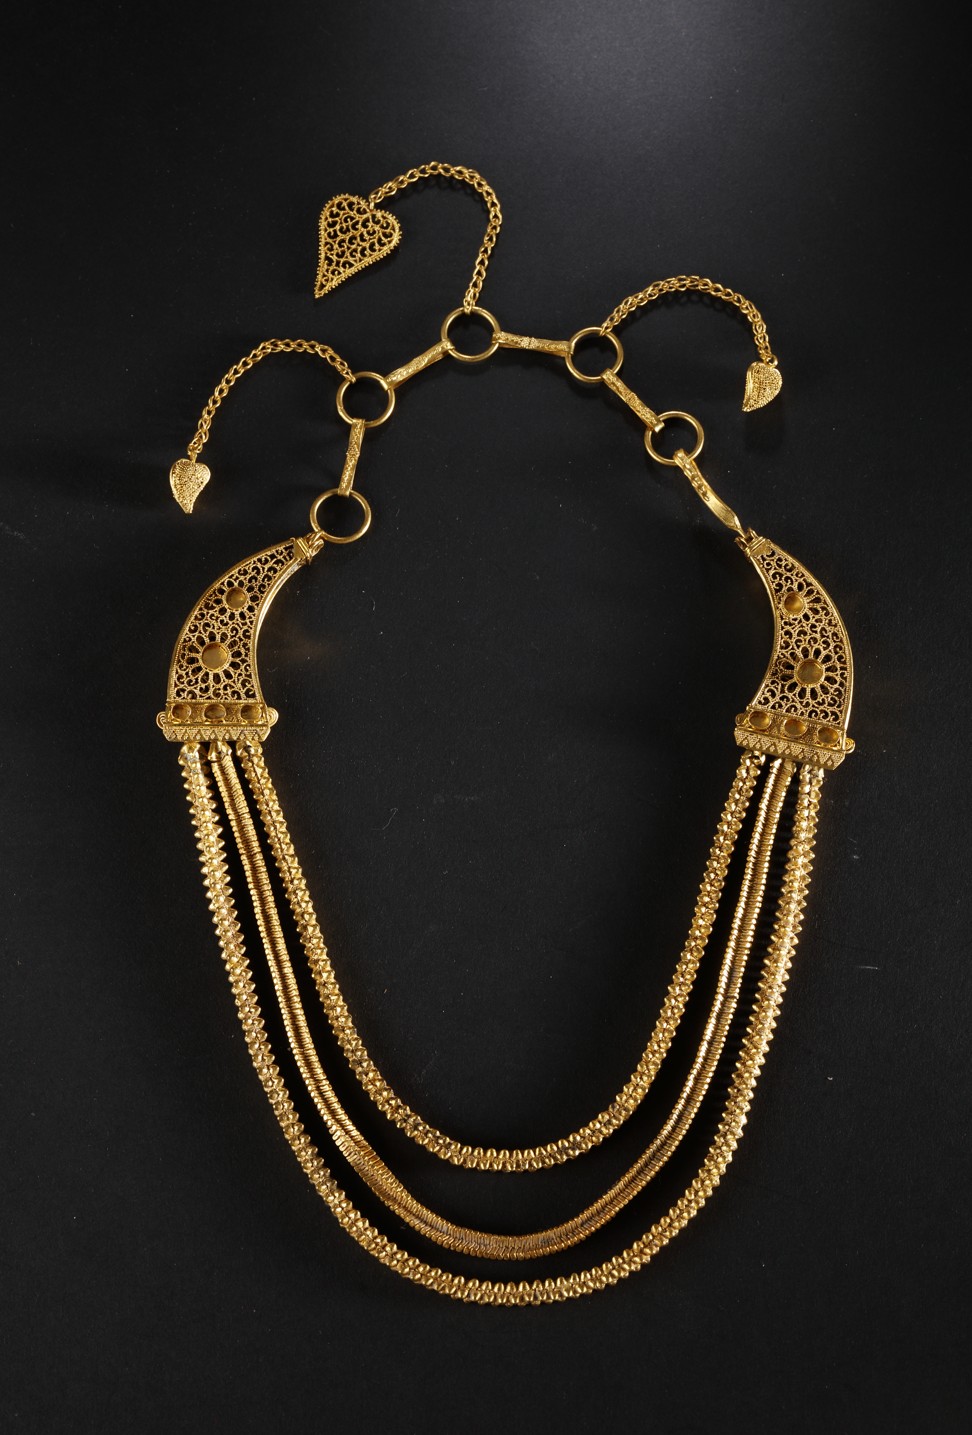 Song dynasty gold necklace salvaged from the Nanhai No. 1 shipwreck in 2014 on show at the exhibition.